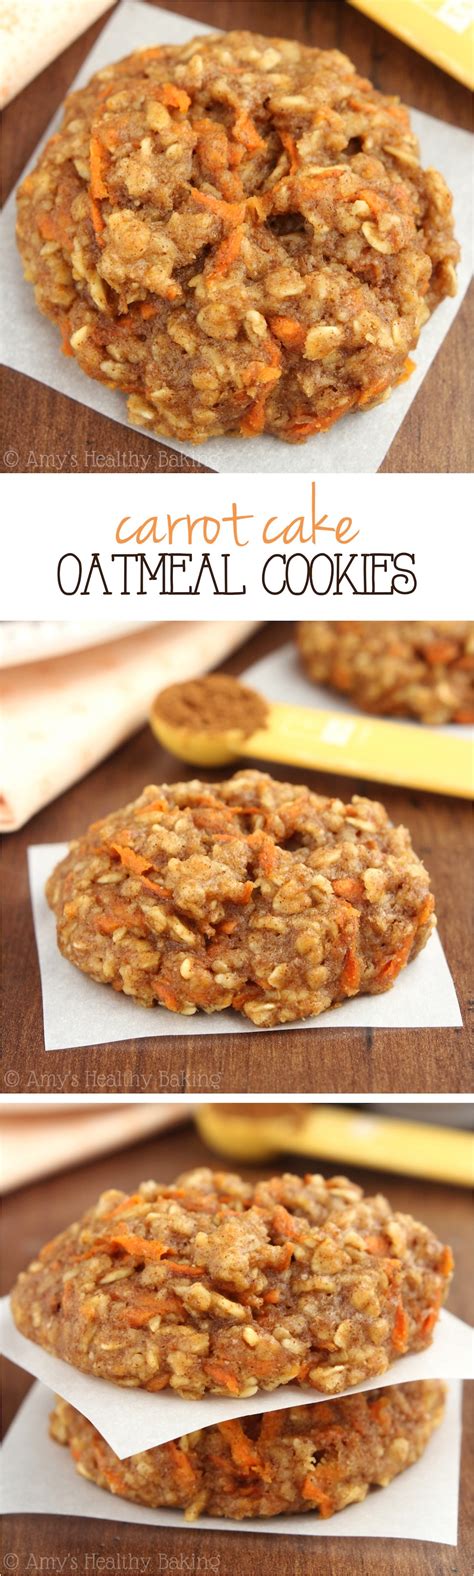 Oatmeal chocolate chip carrot cake scones. Healthy Carrot Cake Oatmeal Cookies -- these skinny ...